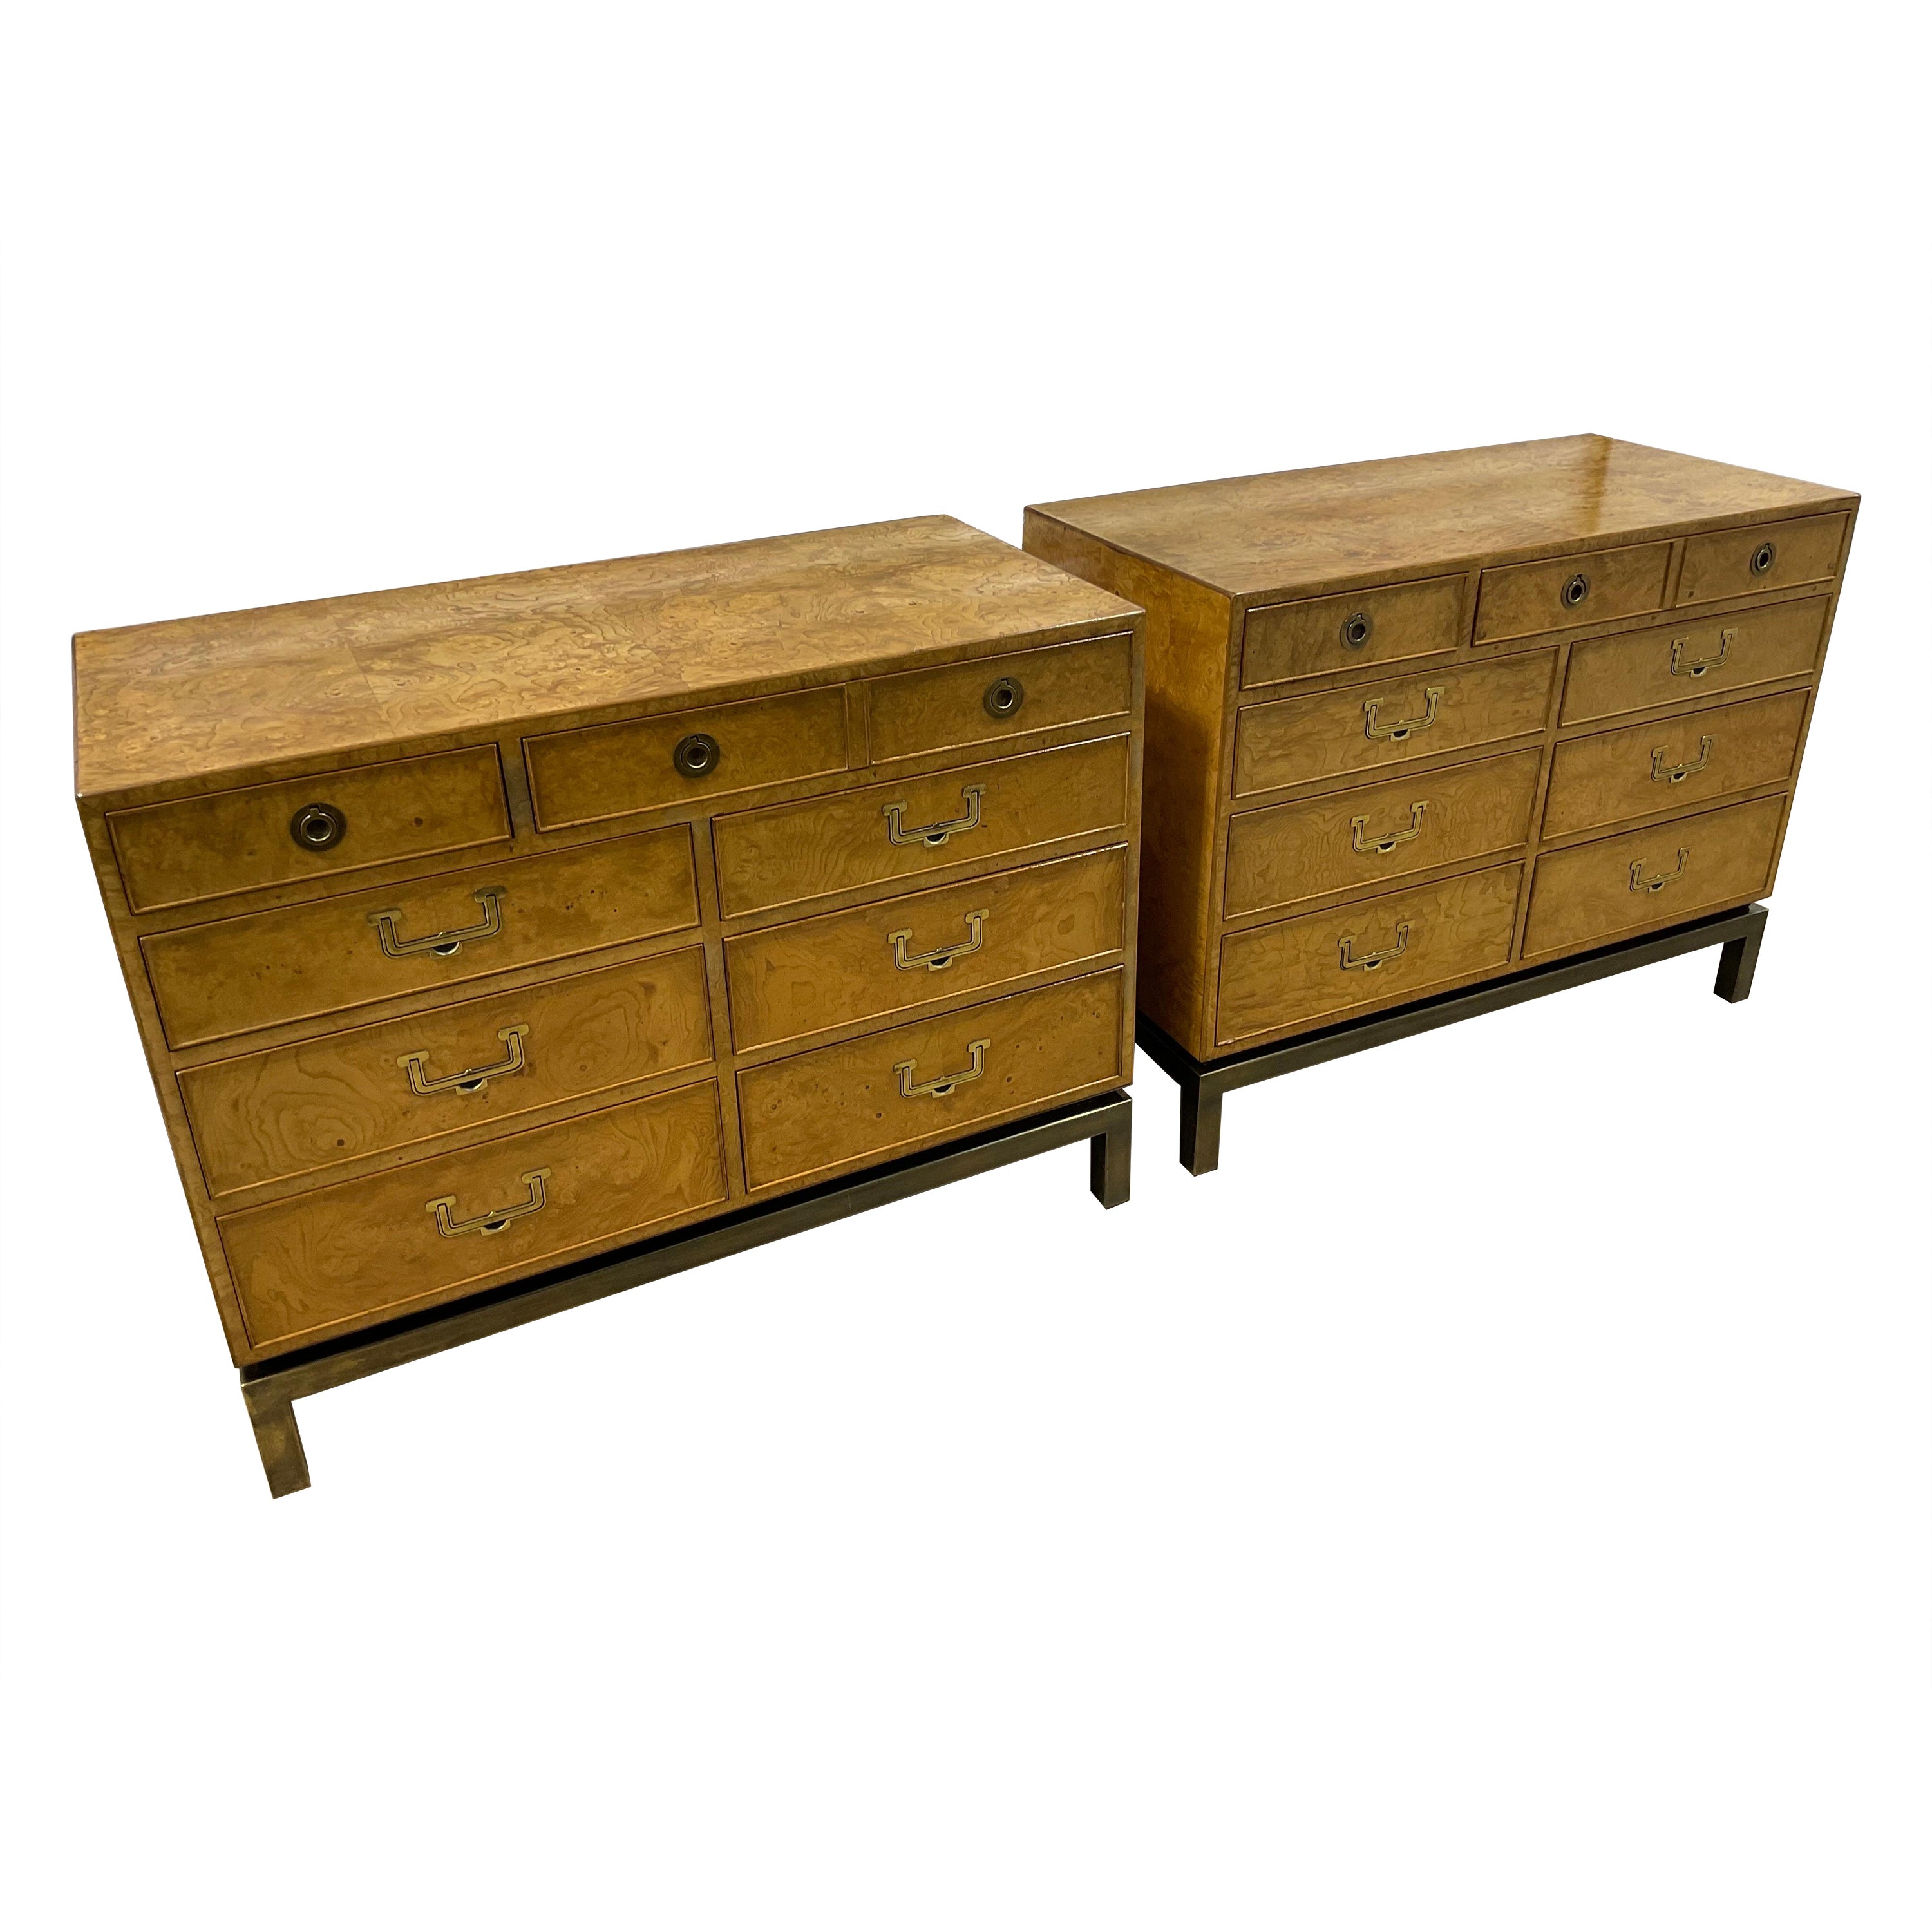 John Widdicomb Vintage Burled Bachelor Chests, a Pair For Sale